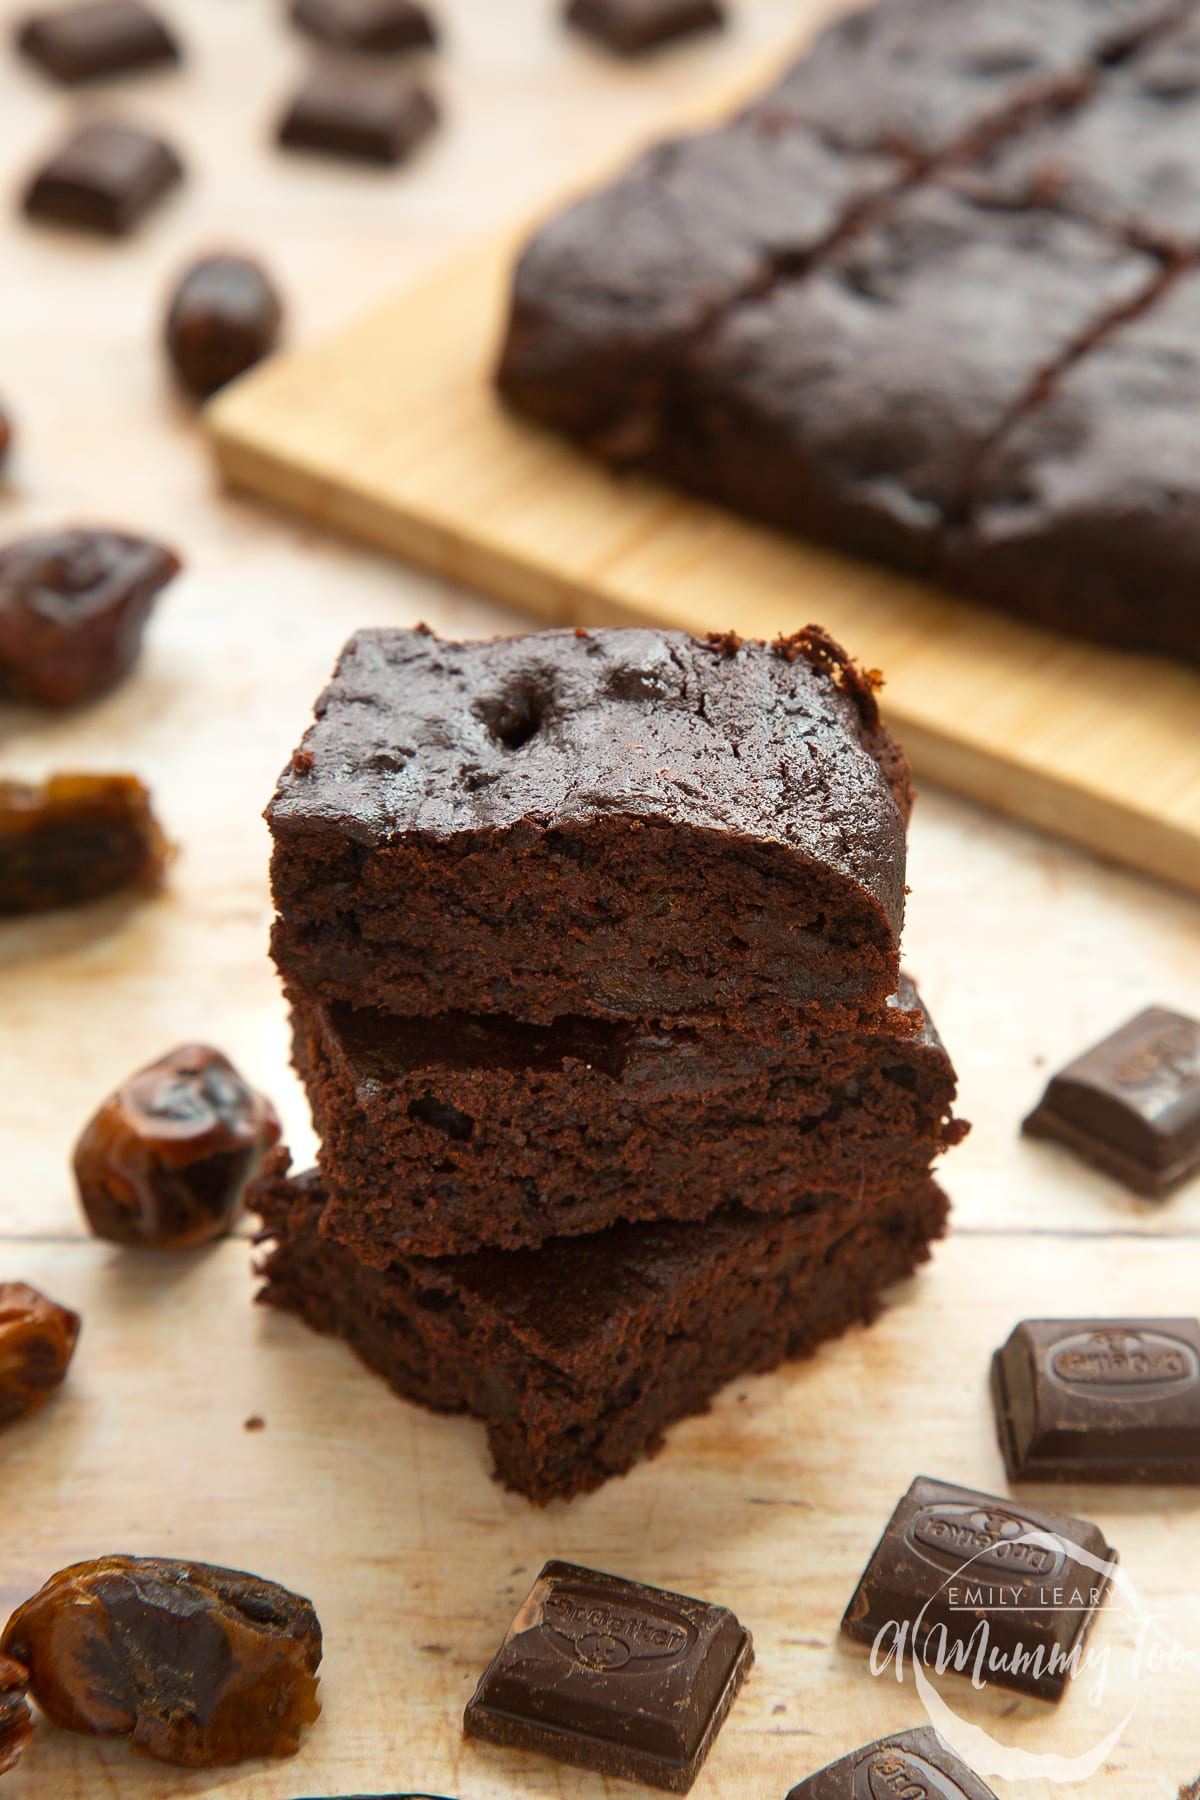 Whole grain brownies made with dates and dark chocolate, stacked up on pale wood.